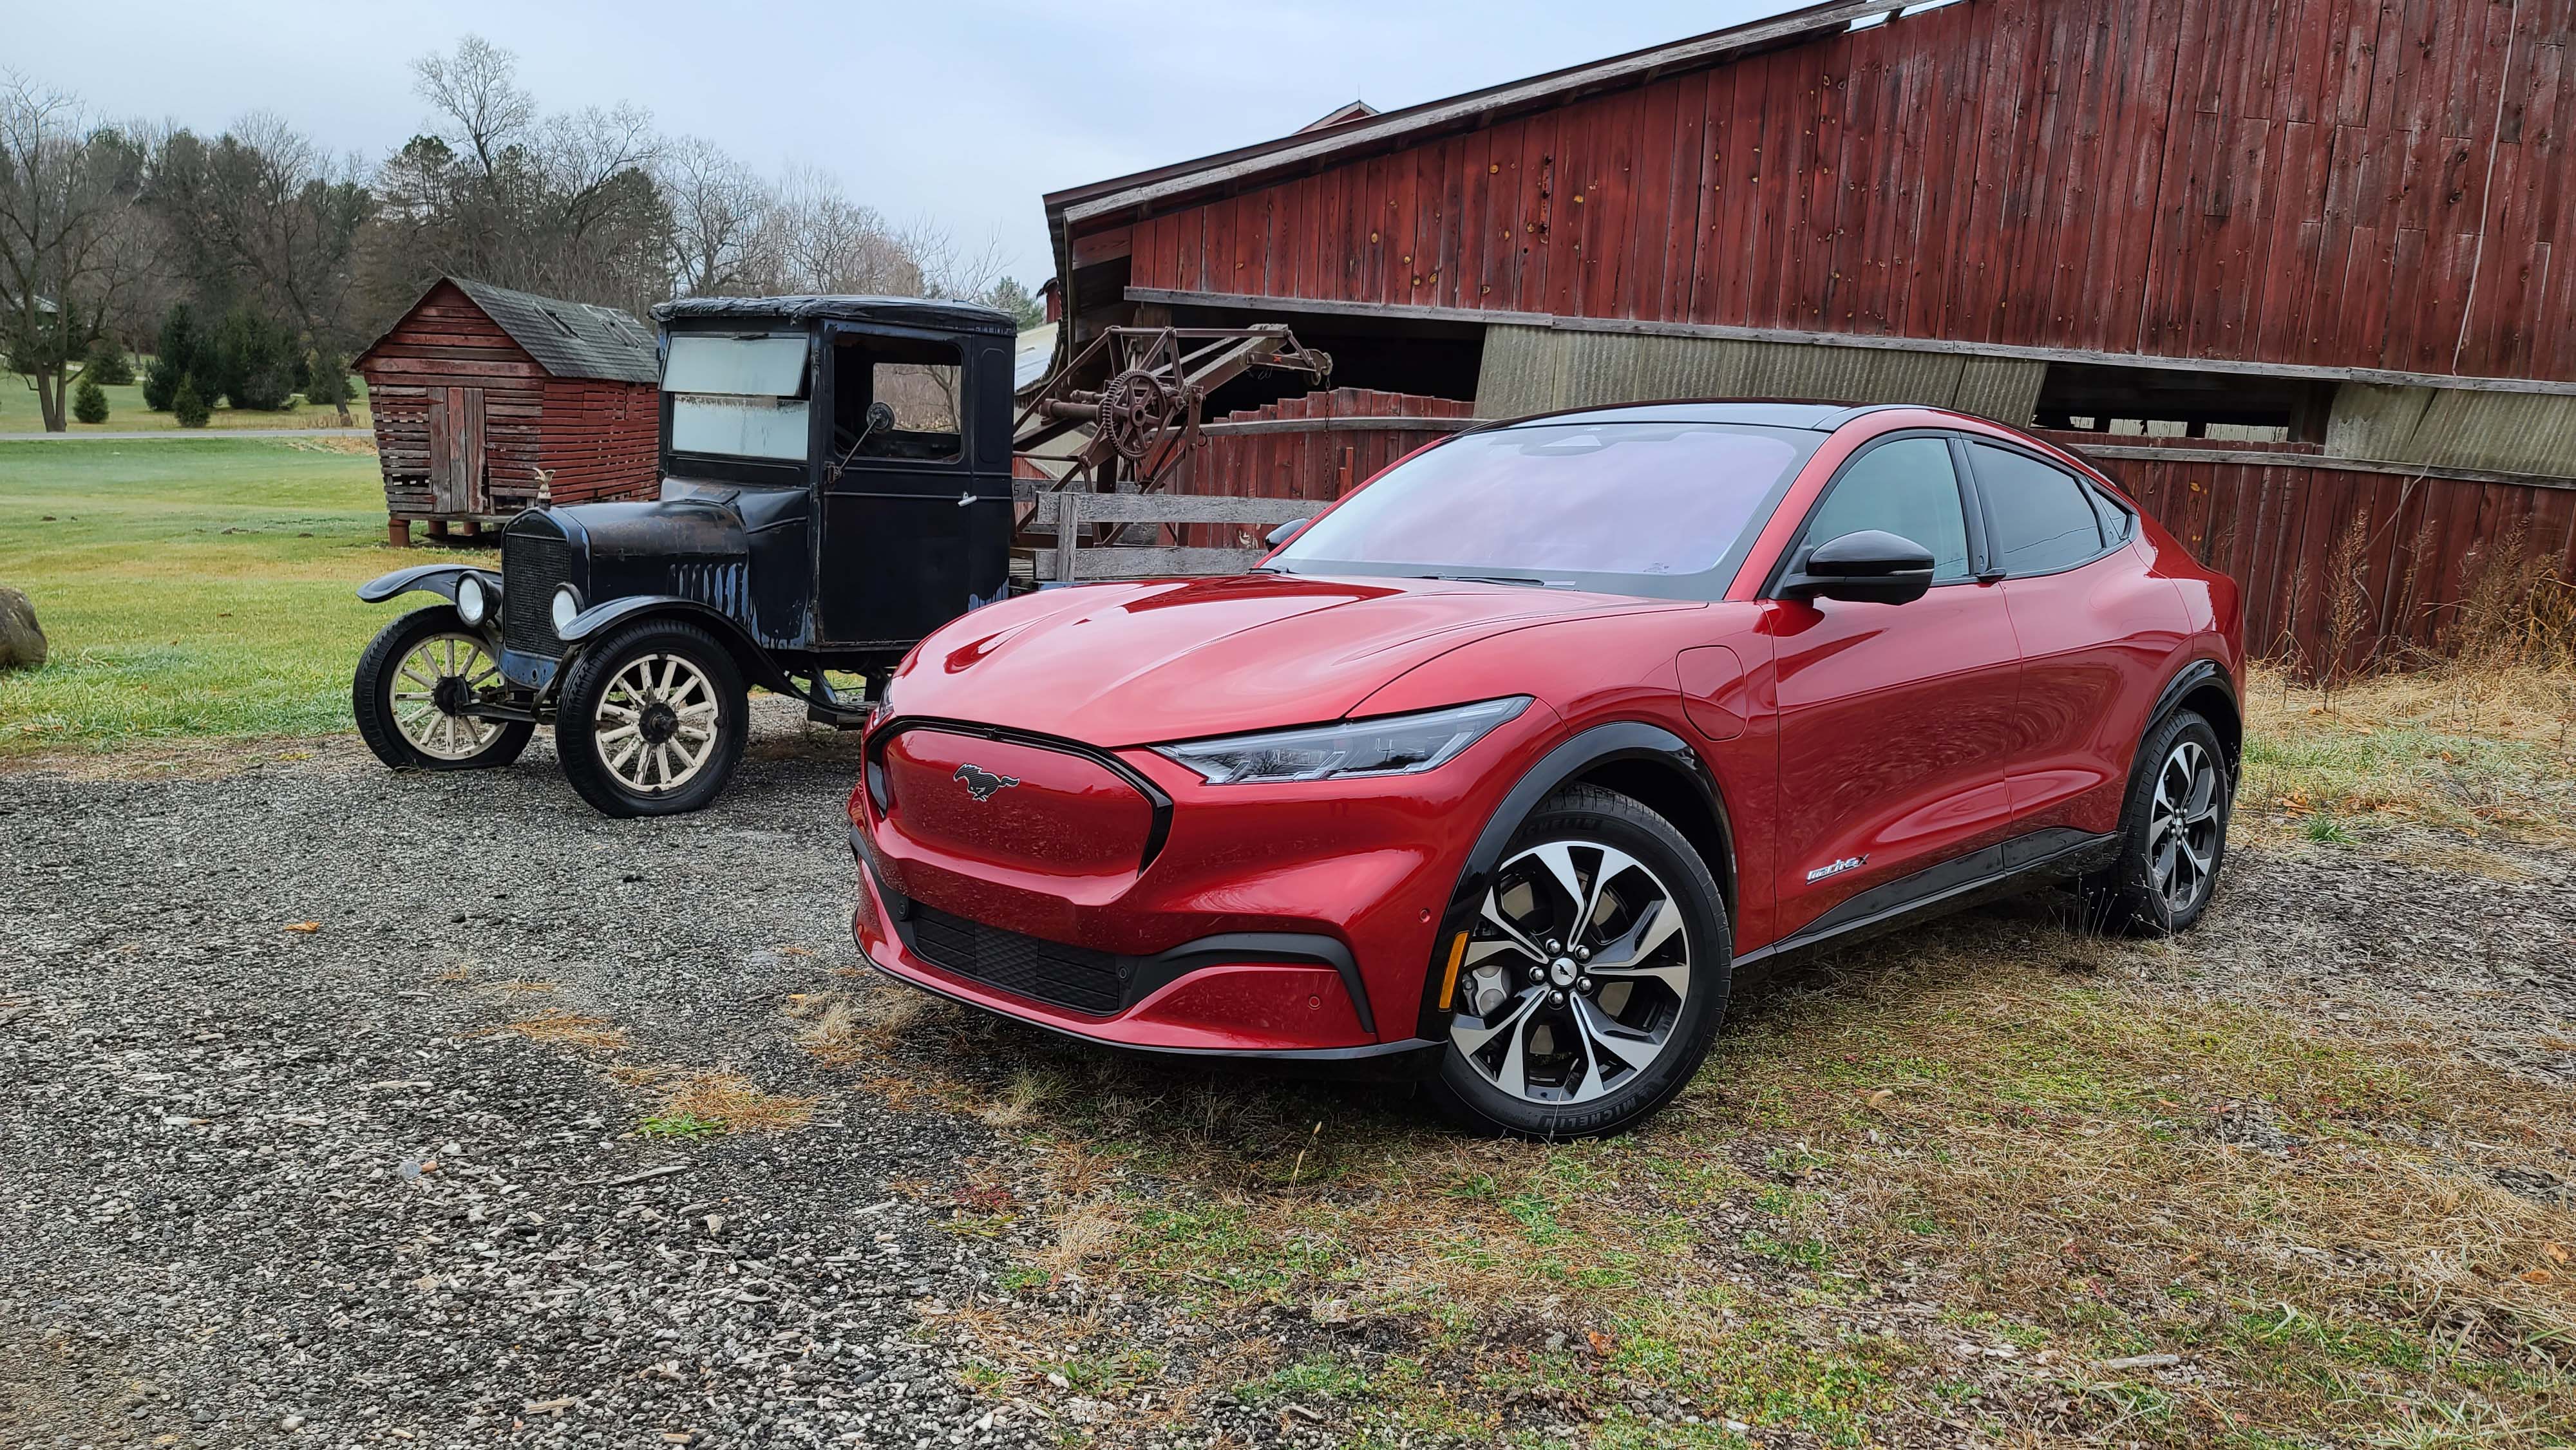 One-hundred years after Ford put electric vehicles out of business with its gas-powered Model T (left), the 2021 Ford Mustang Mach-E seeks to help pioneer a new-generation of EVs.